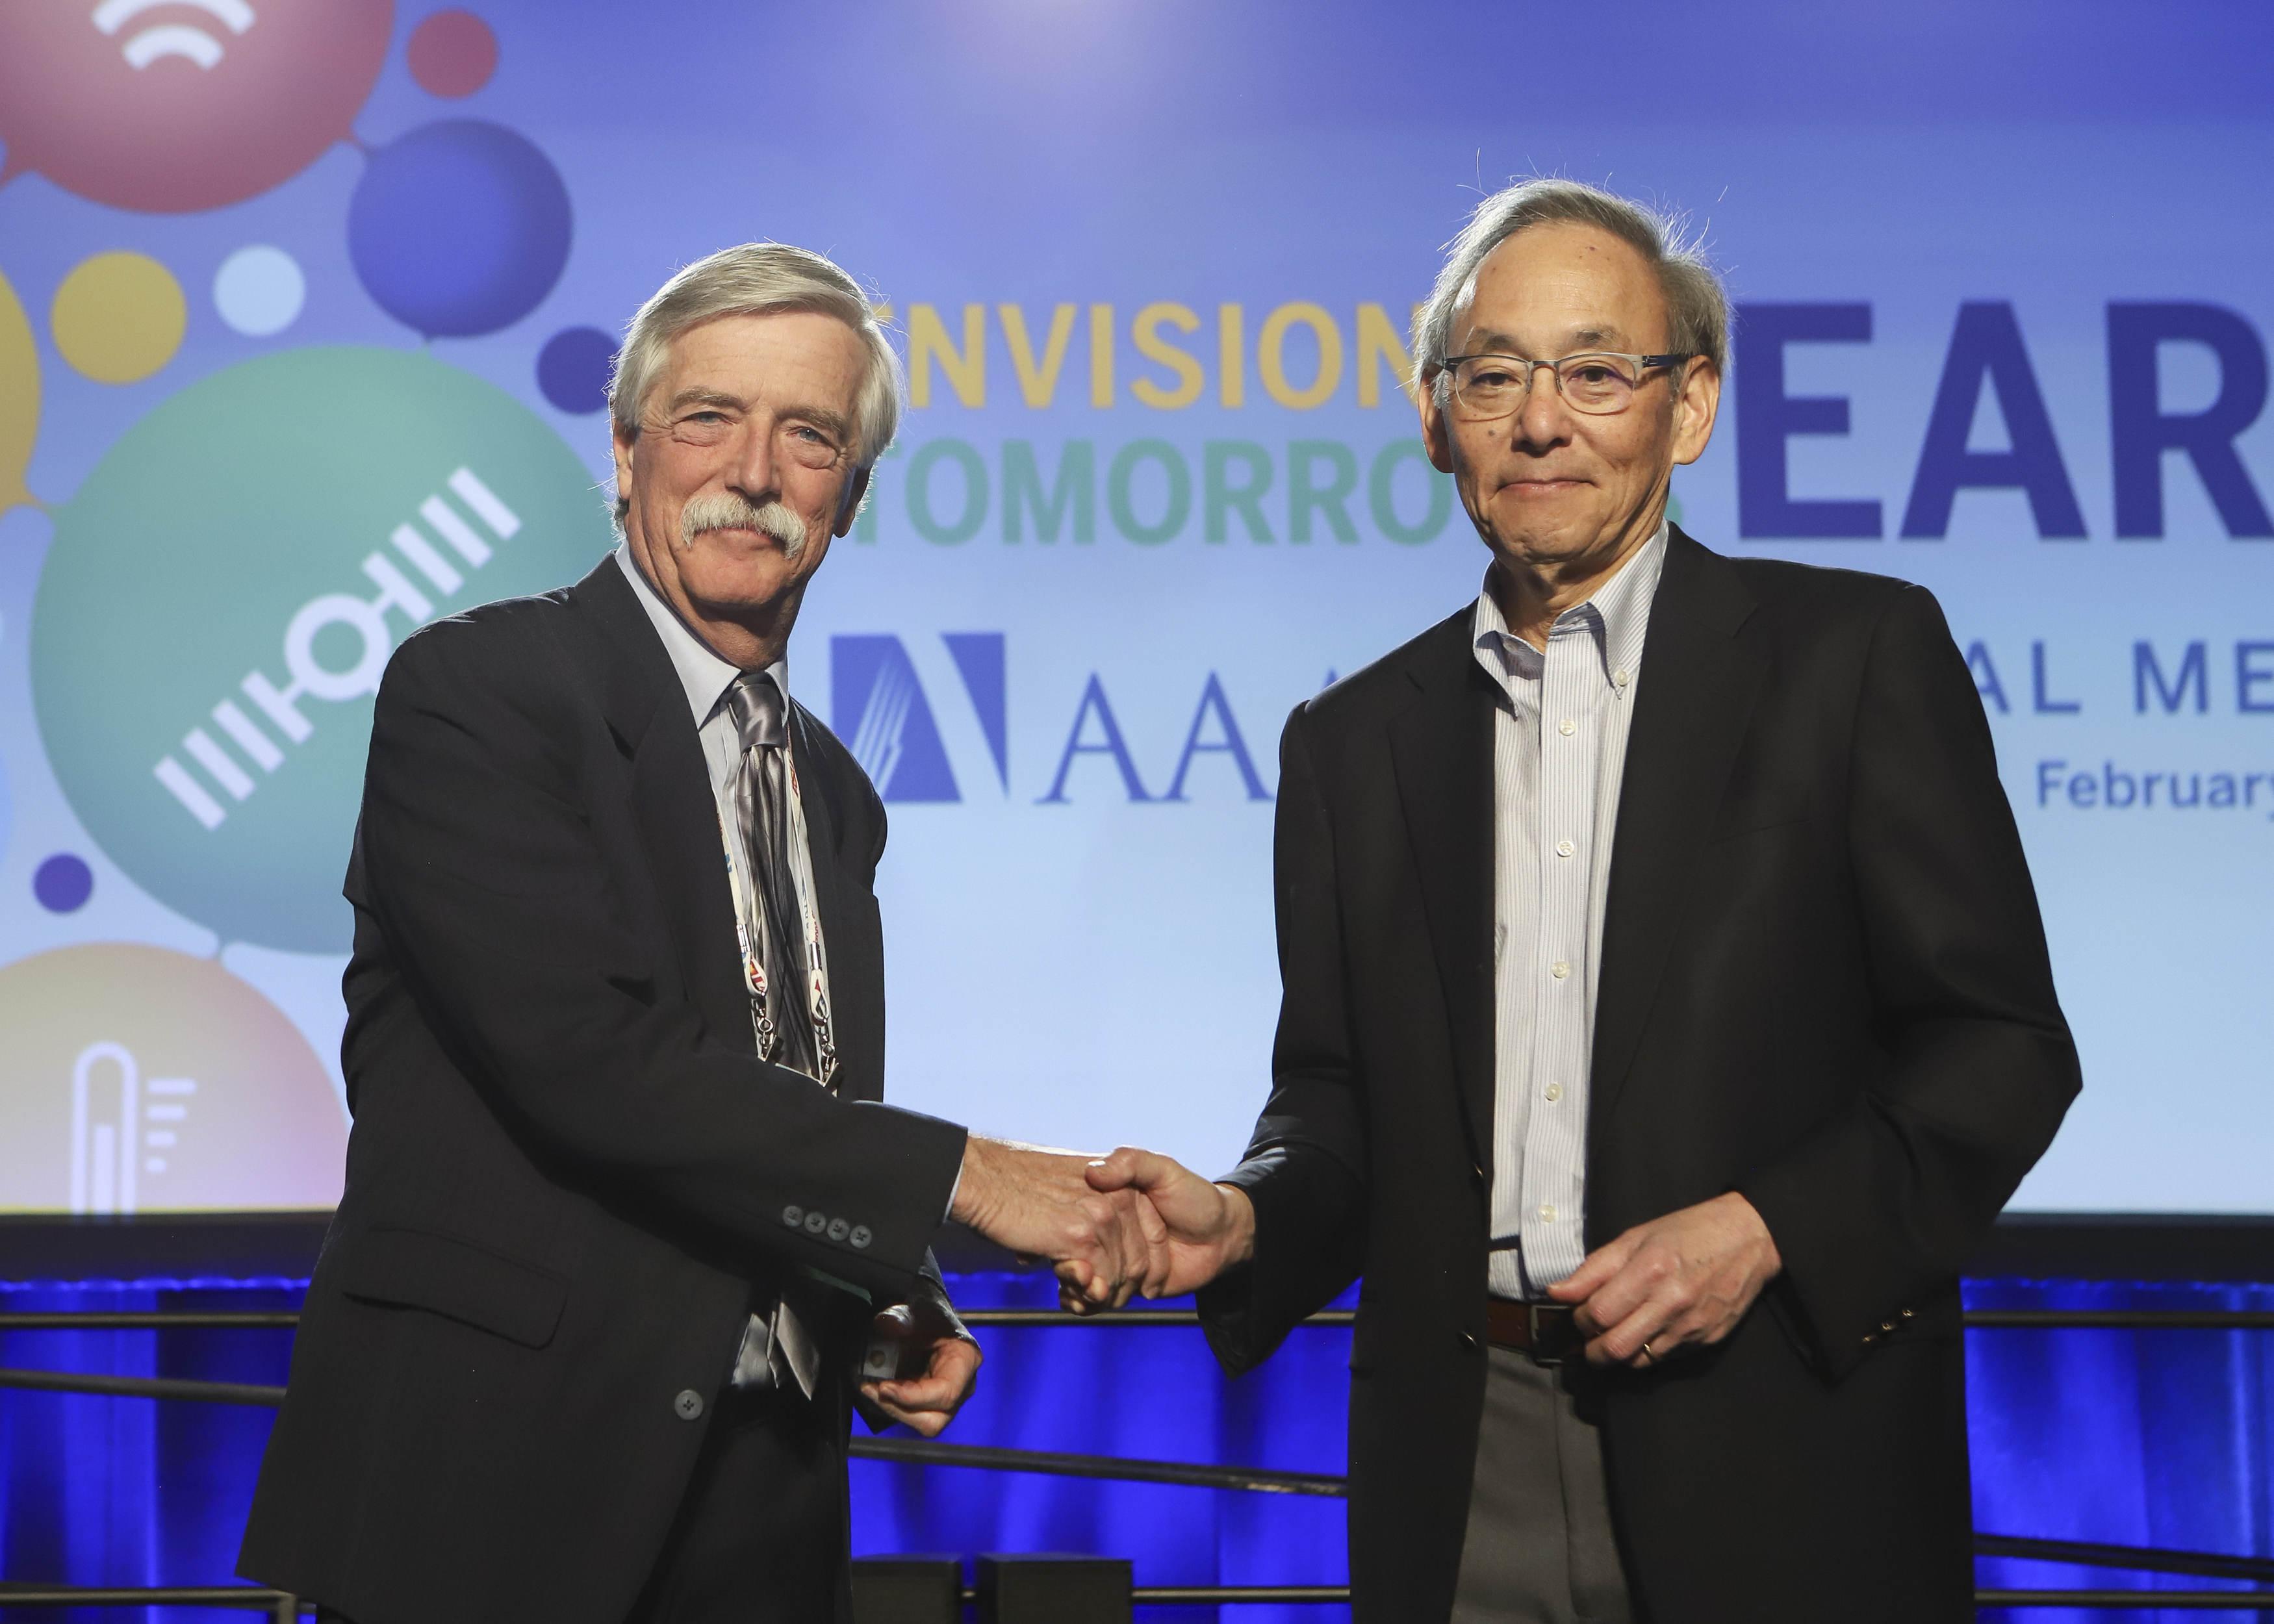 Shaking hands with Steve Chu at AAAS Fellows reception in Seattle, just pre-COVID.